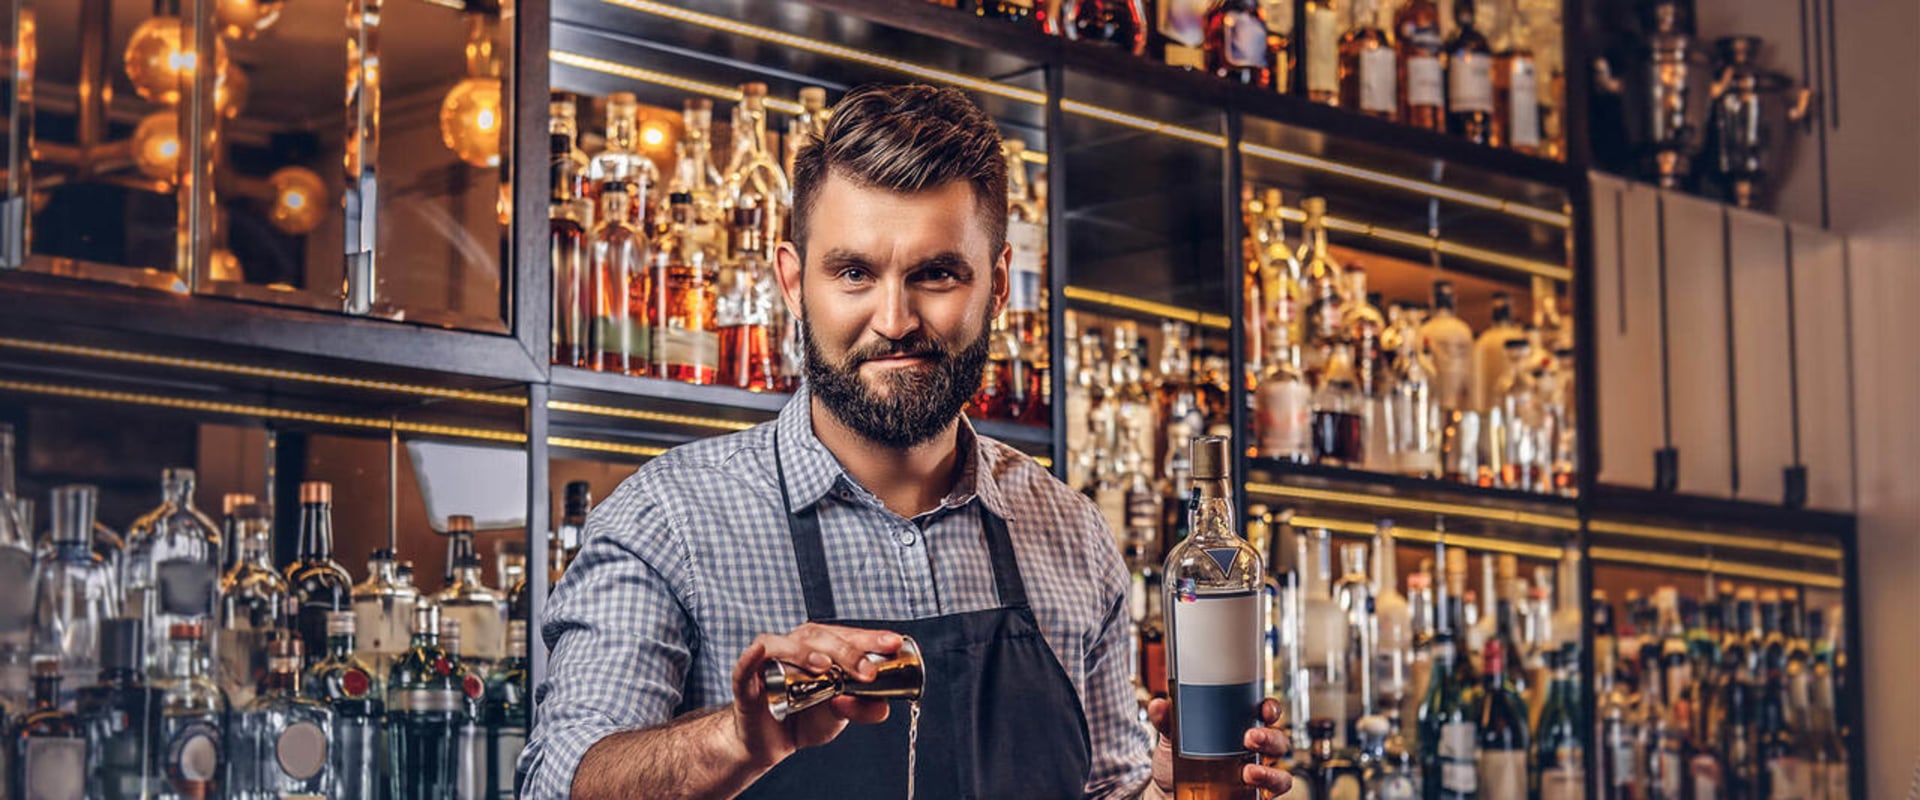 What Employers Look for in a Bartender